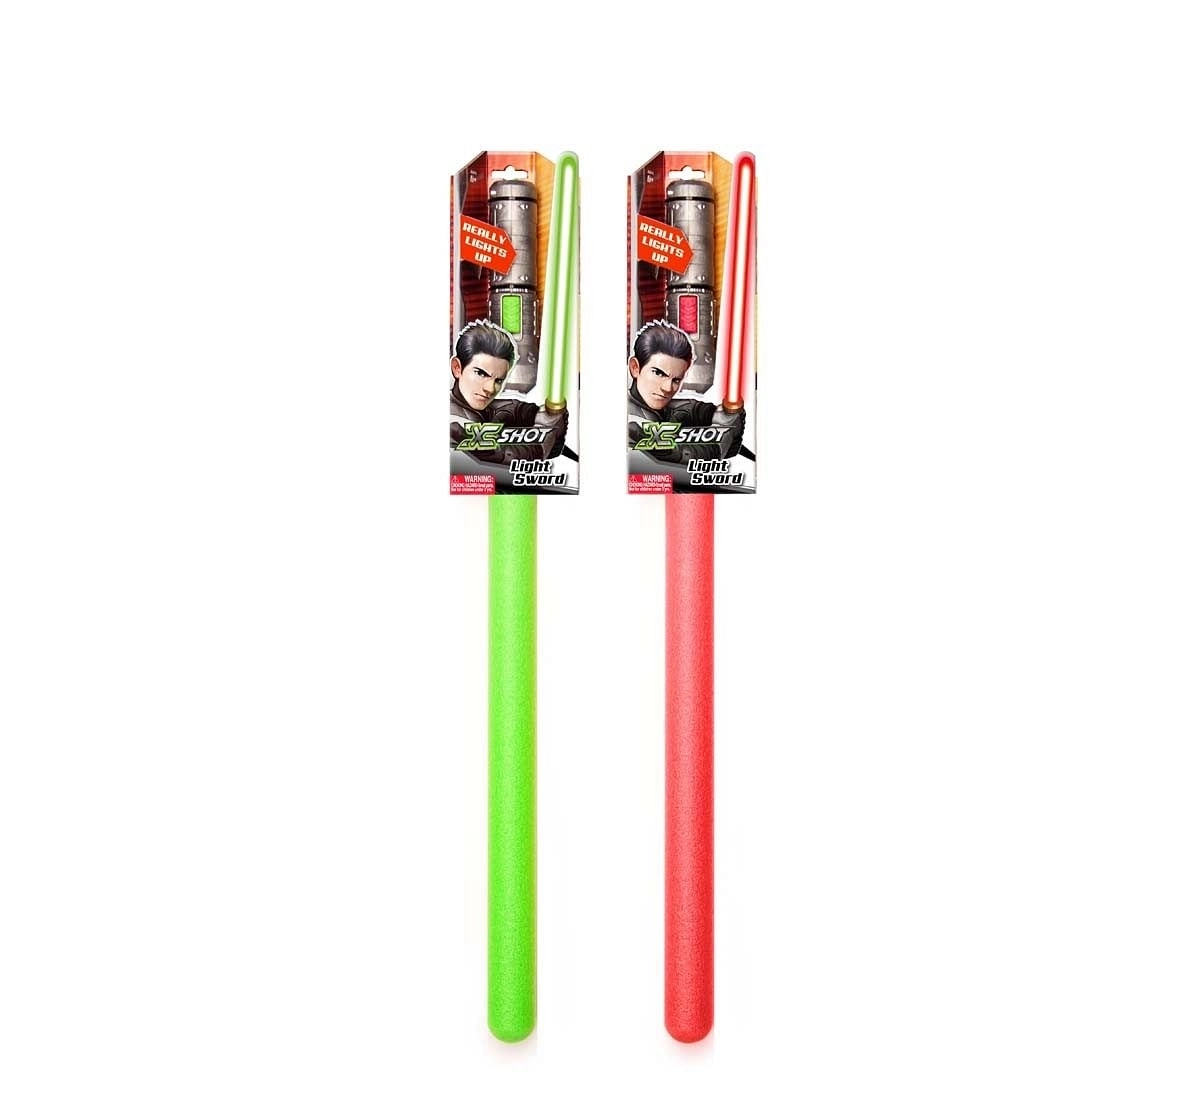 X-Shot Light Swords With Led Action Figure Play Sets for Kids age 8Y+ 